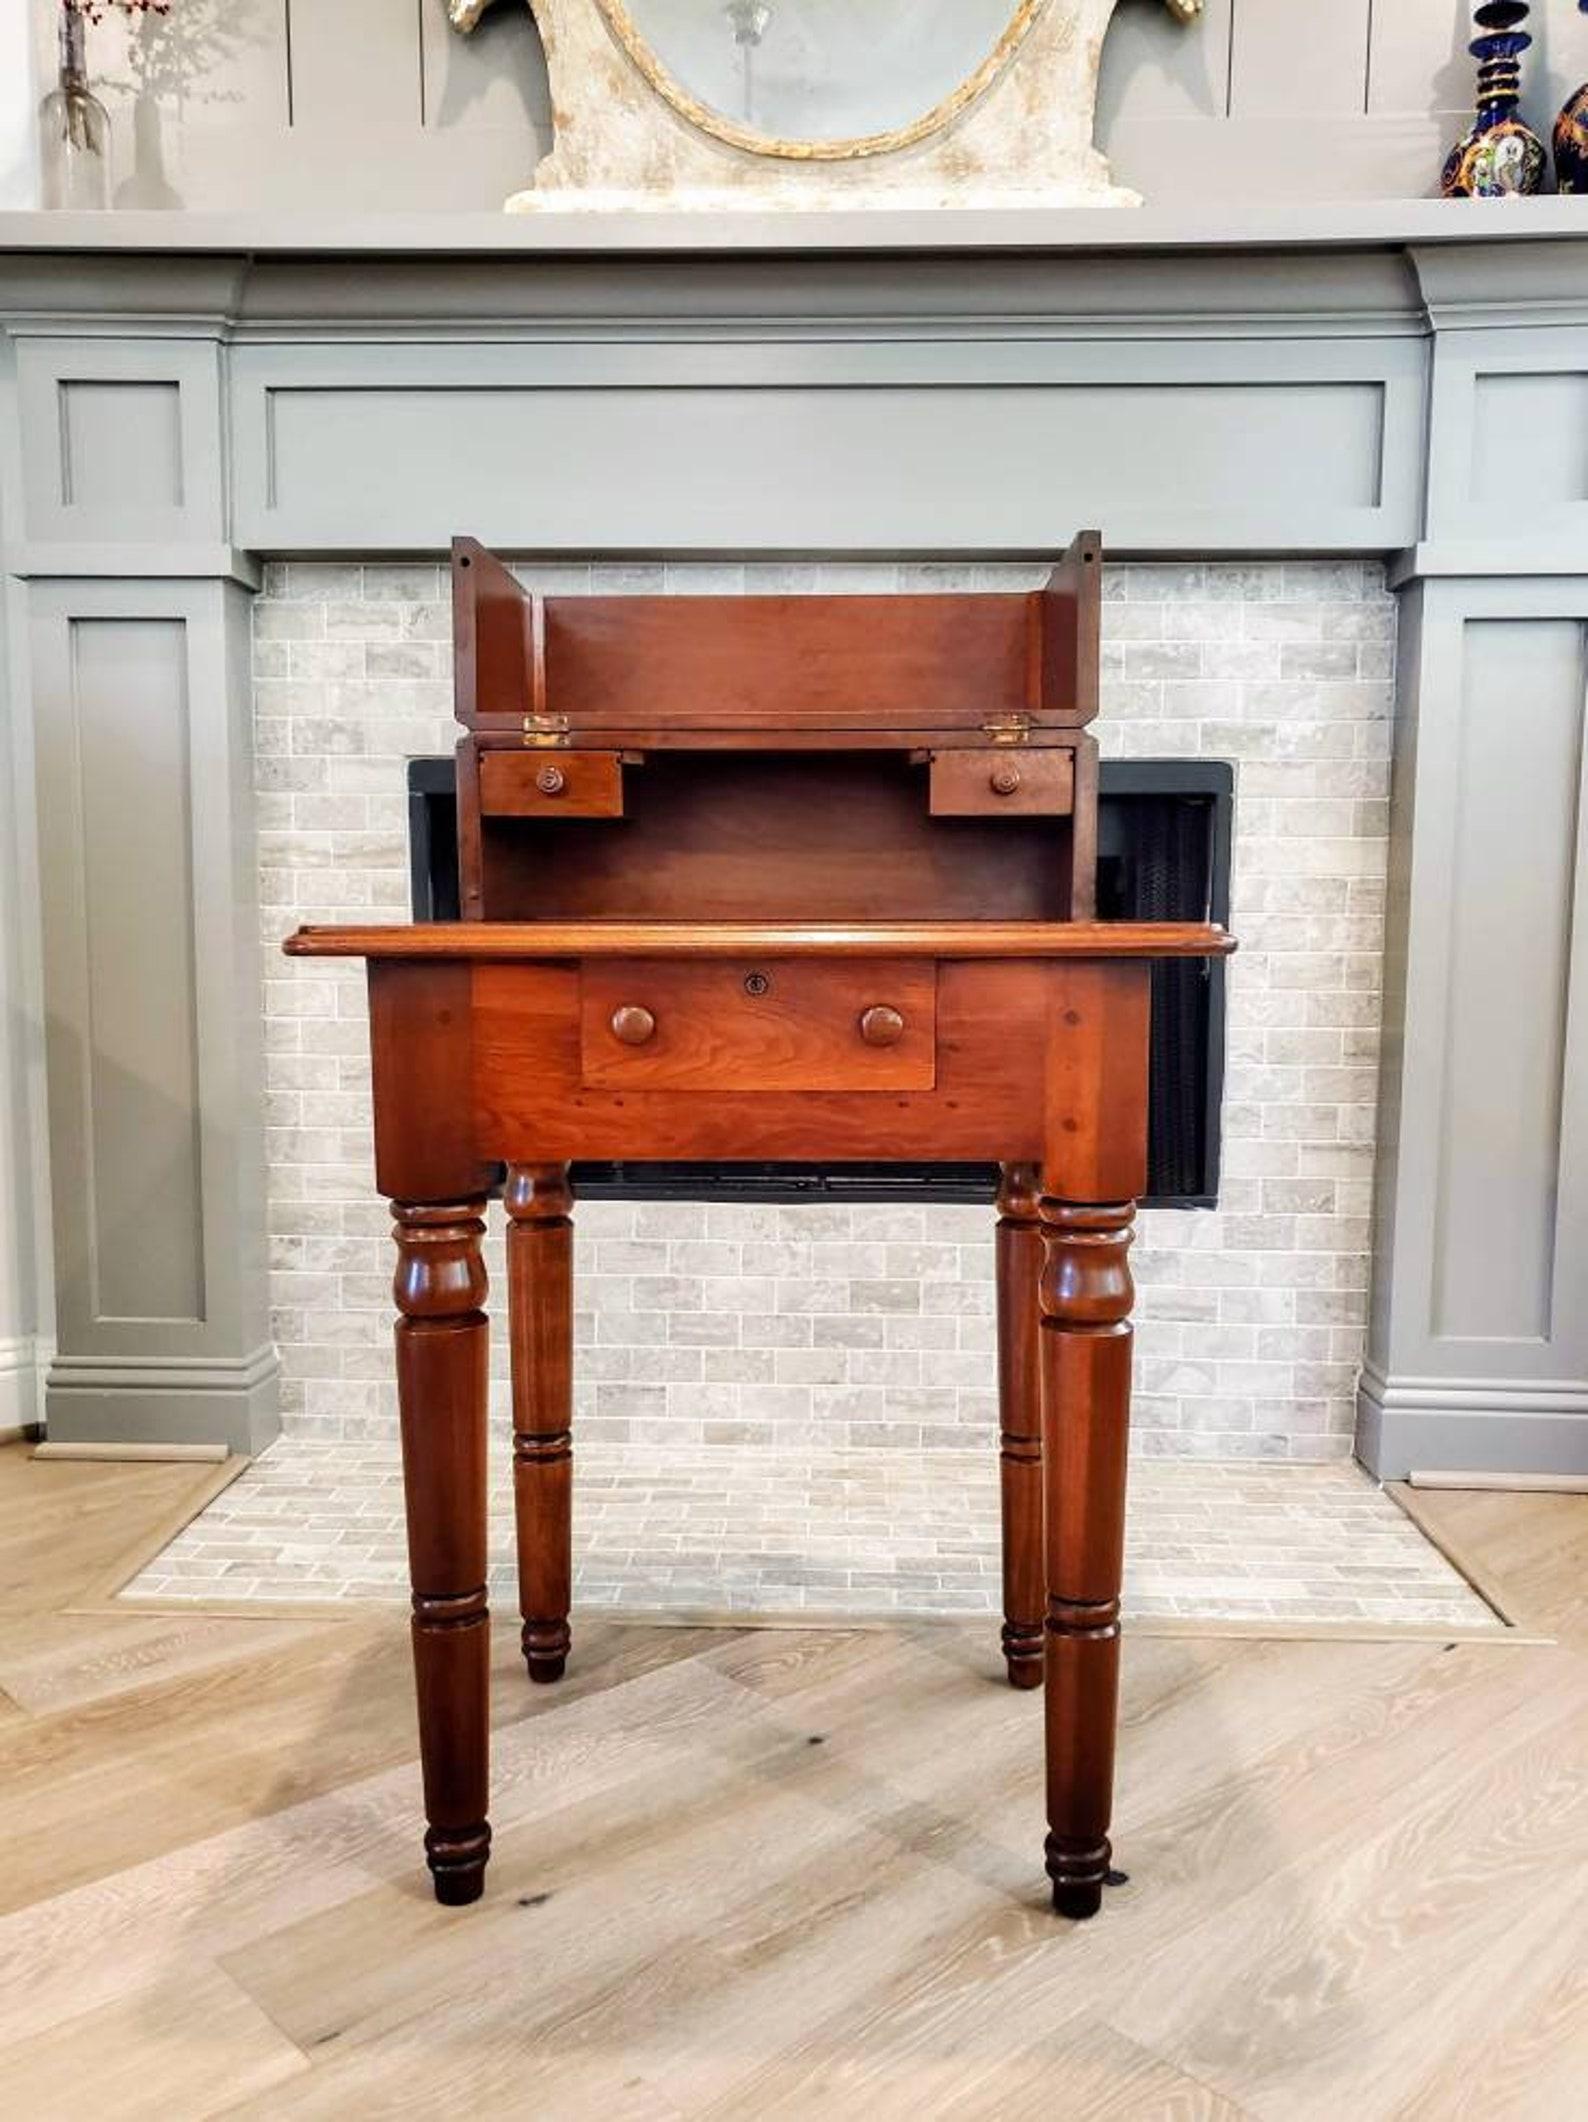 A rare and most unusual Federal period mahogany campaign field desk from the early 19th century. Believed to have been used as a maritime sea captains desk.

Born in the Mid-Atlantic region of the United States, circa 1820, of box on stand design,